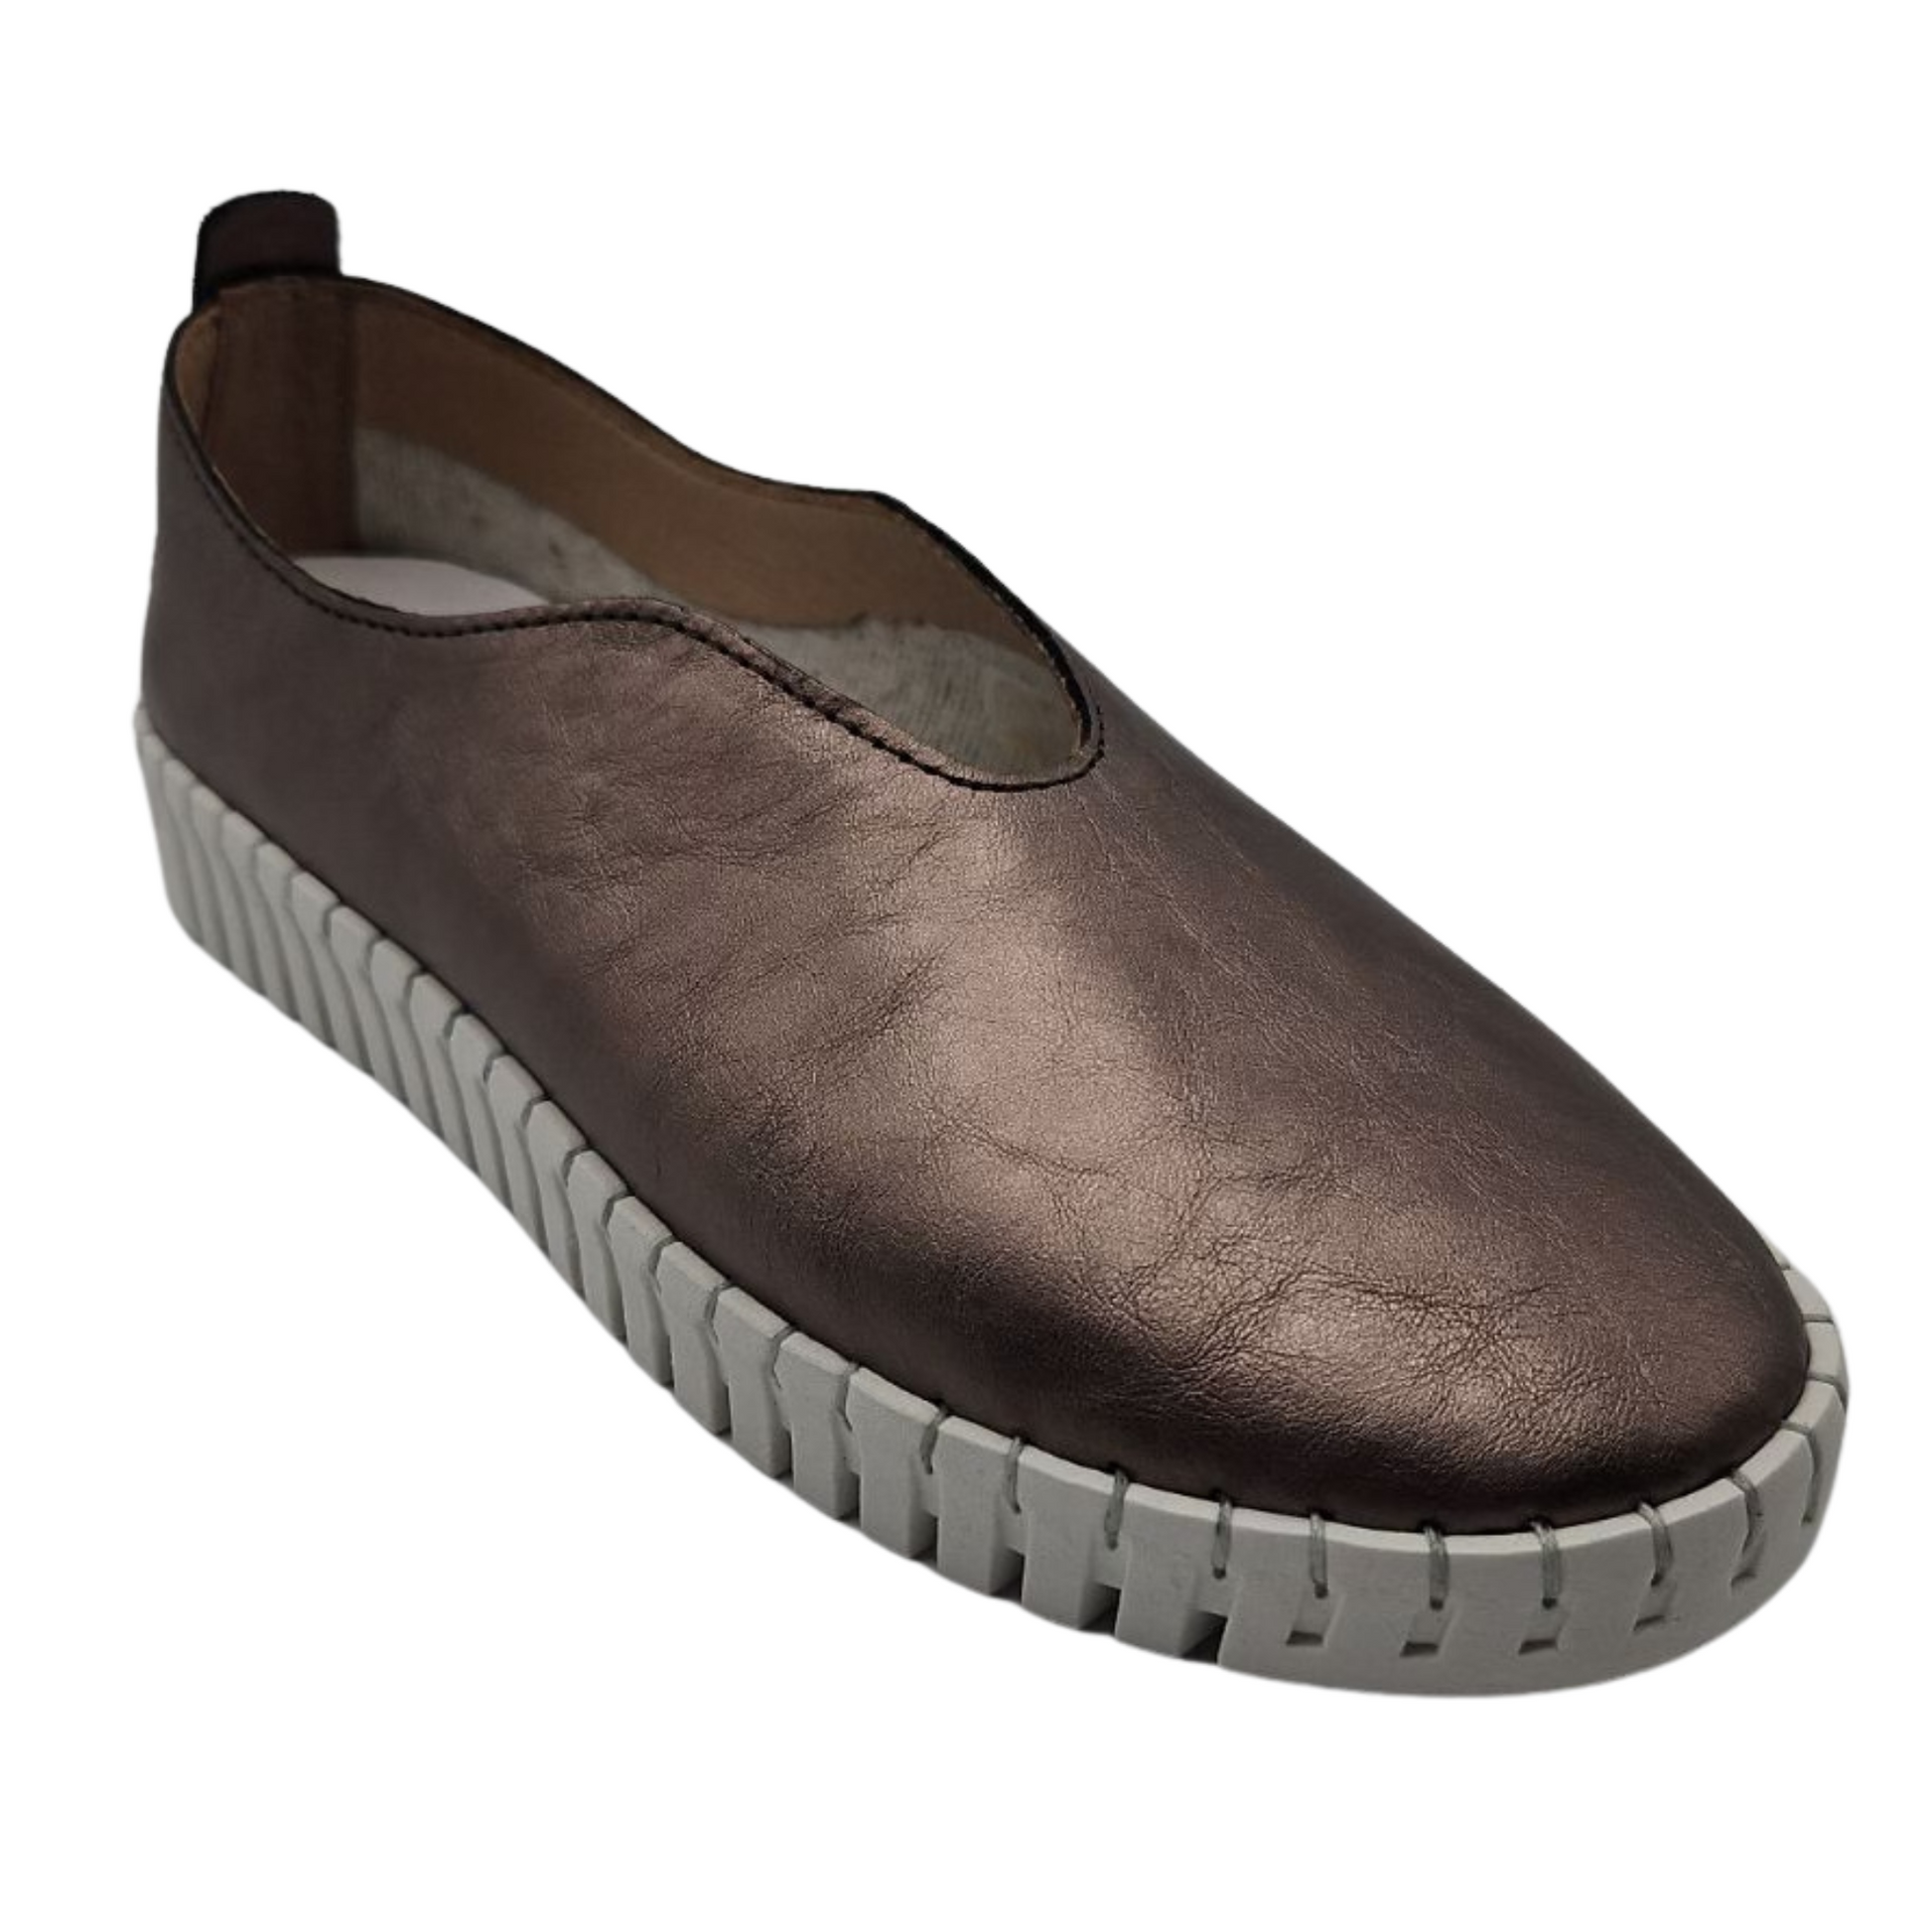 45 degree angled view of pewter leather slip on shoe with white rubber outsole